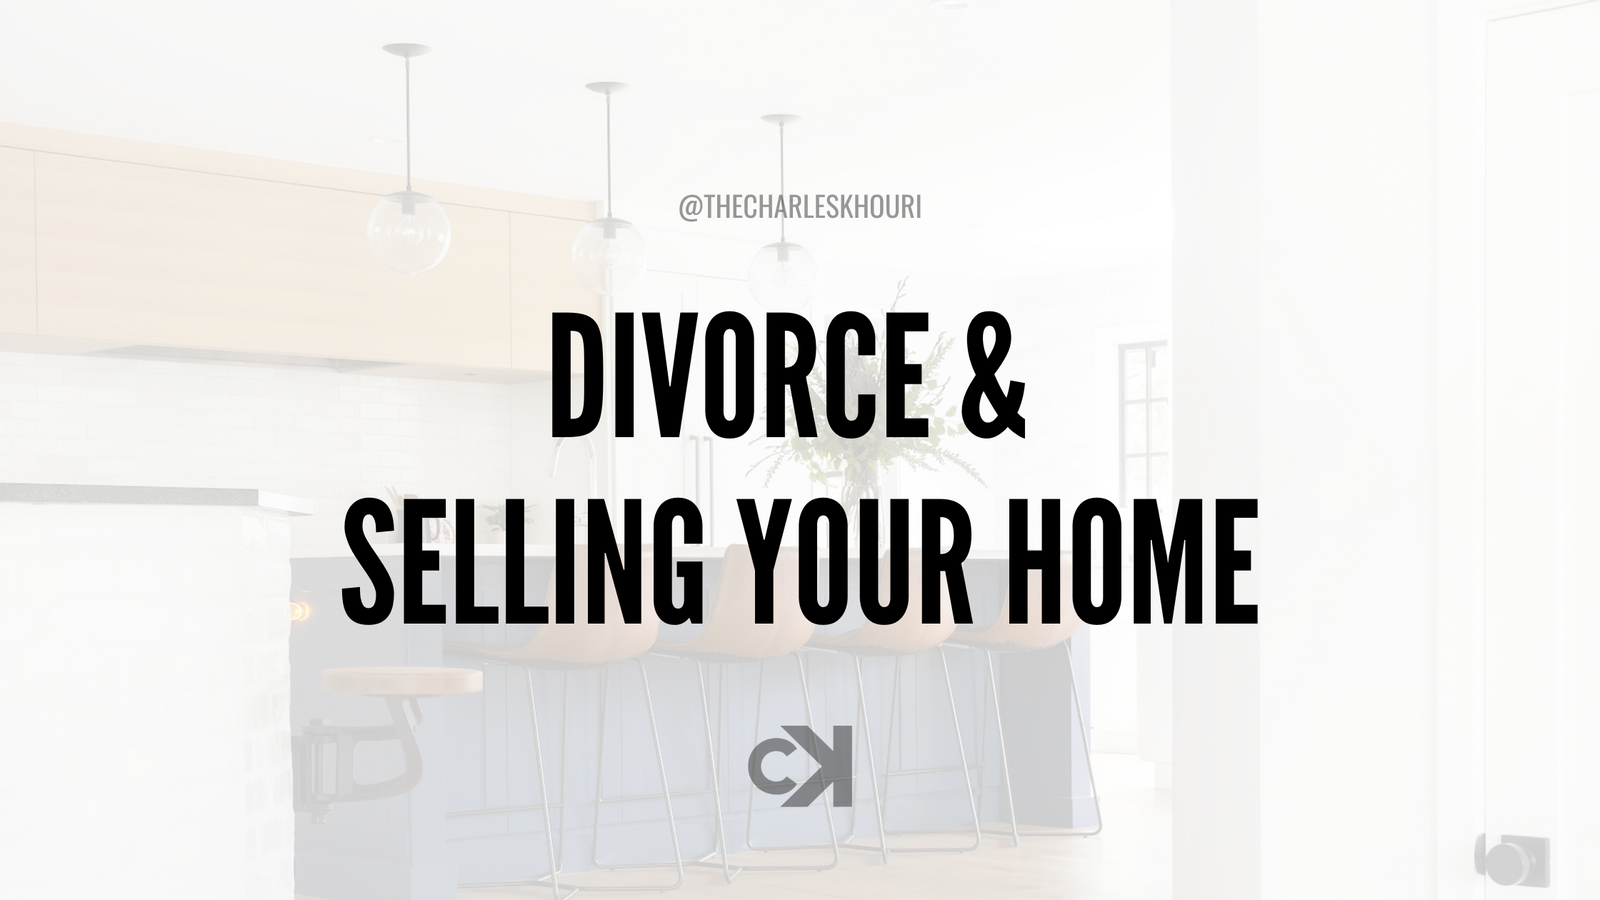 Divorce & Selling Your Home